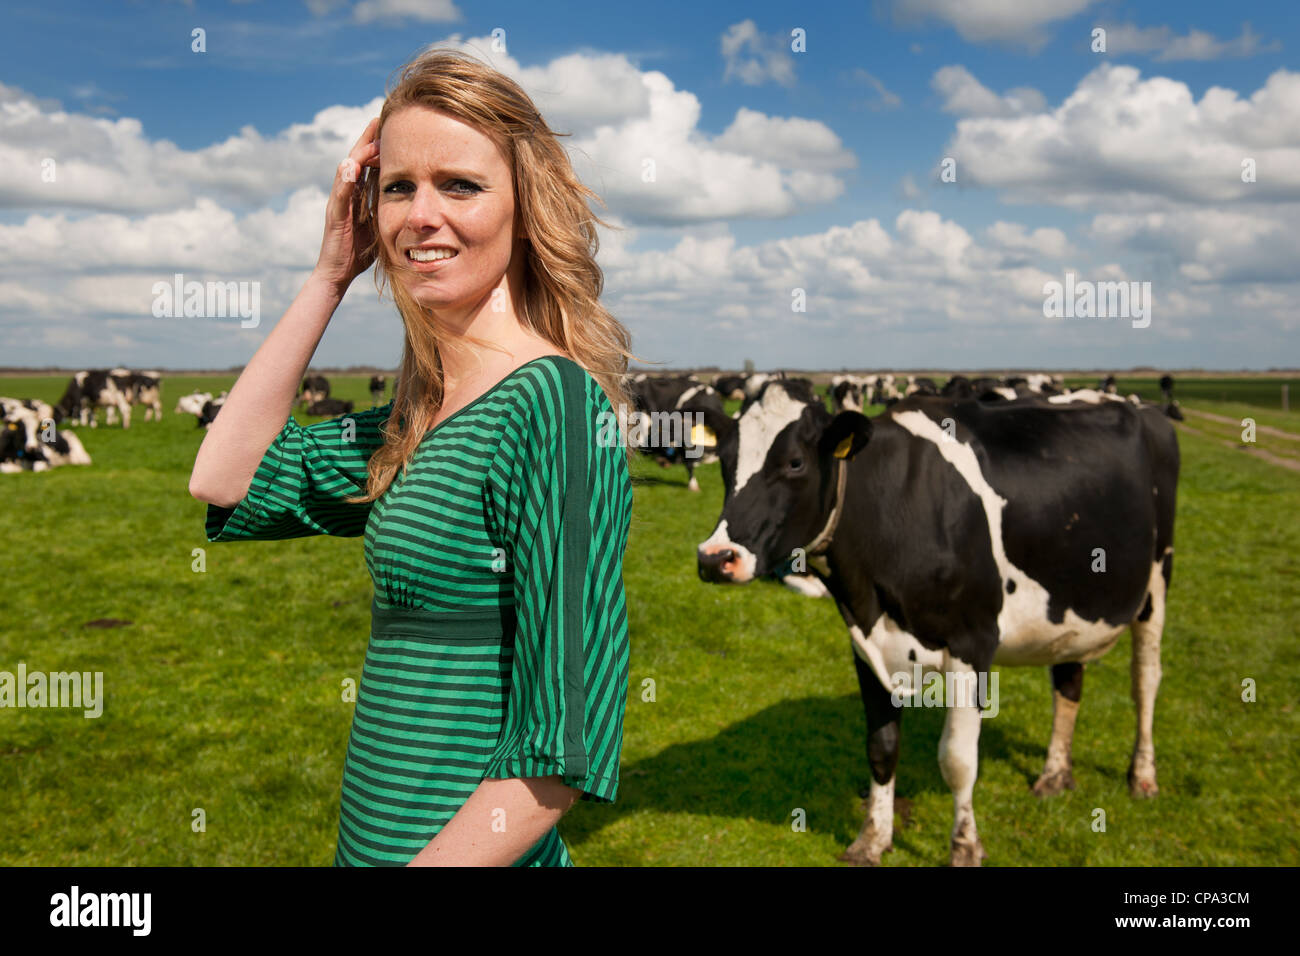 Young Blond Dutch Girl In Farm Field With Black And White Cows Stock